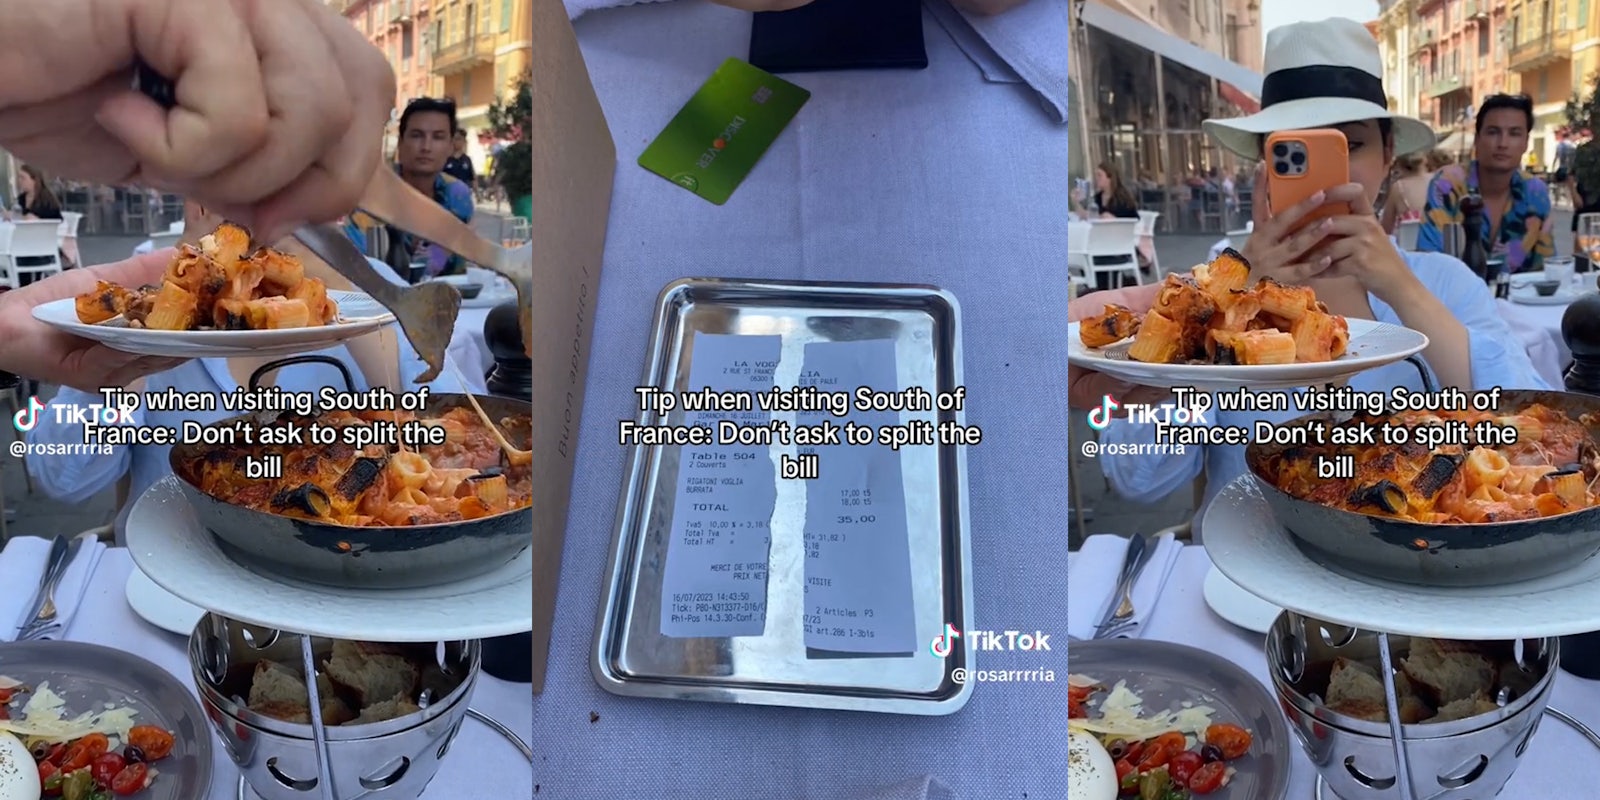 diners in France ask for bill to be split, receive bill ripped in half